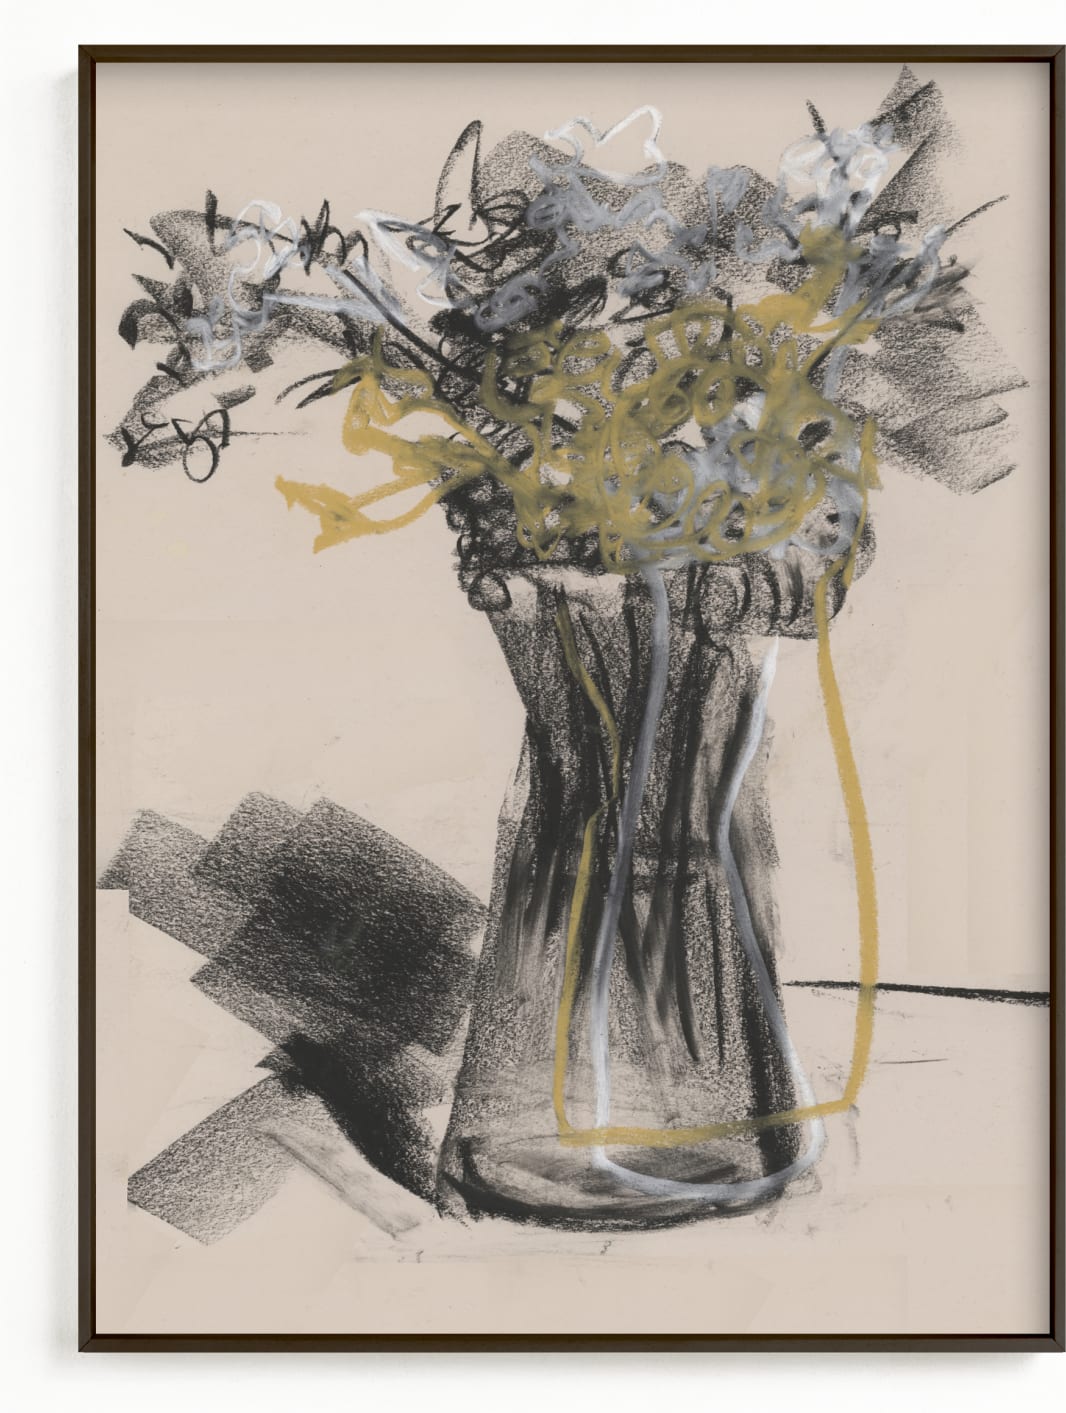 This is a yellow art by Bethania Lima called Vase of flower gestural drawing exercise.